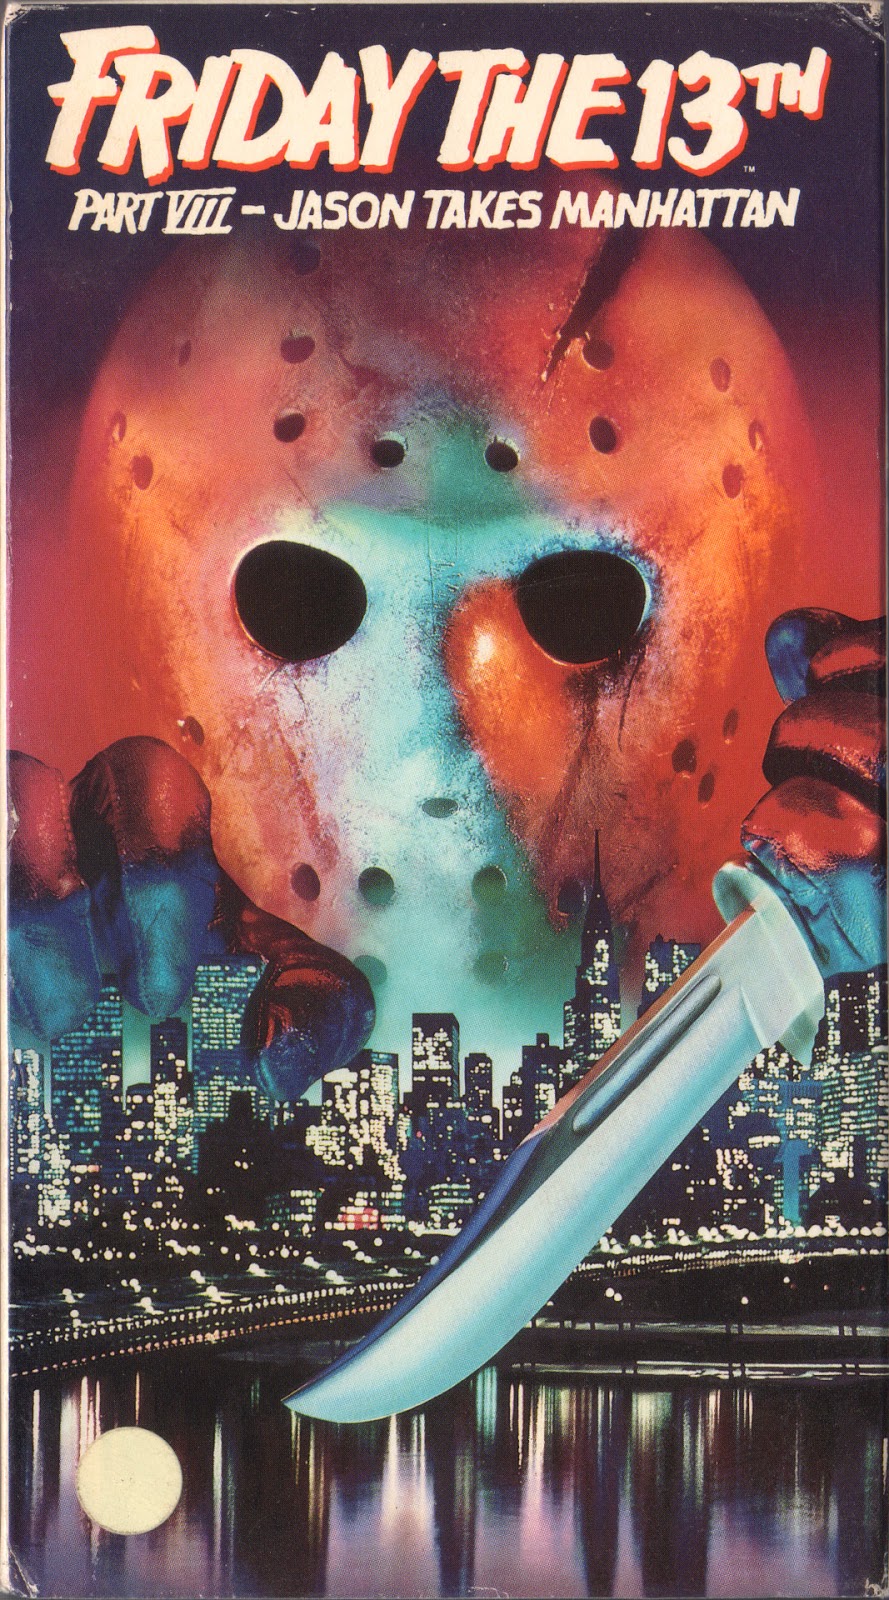 Amazing Friday The 13th Part VIII: Jason Takes Manhattan Pictures & Backgrounds